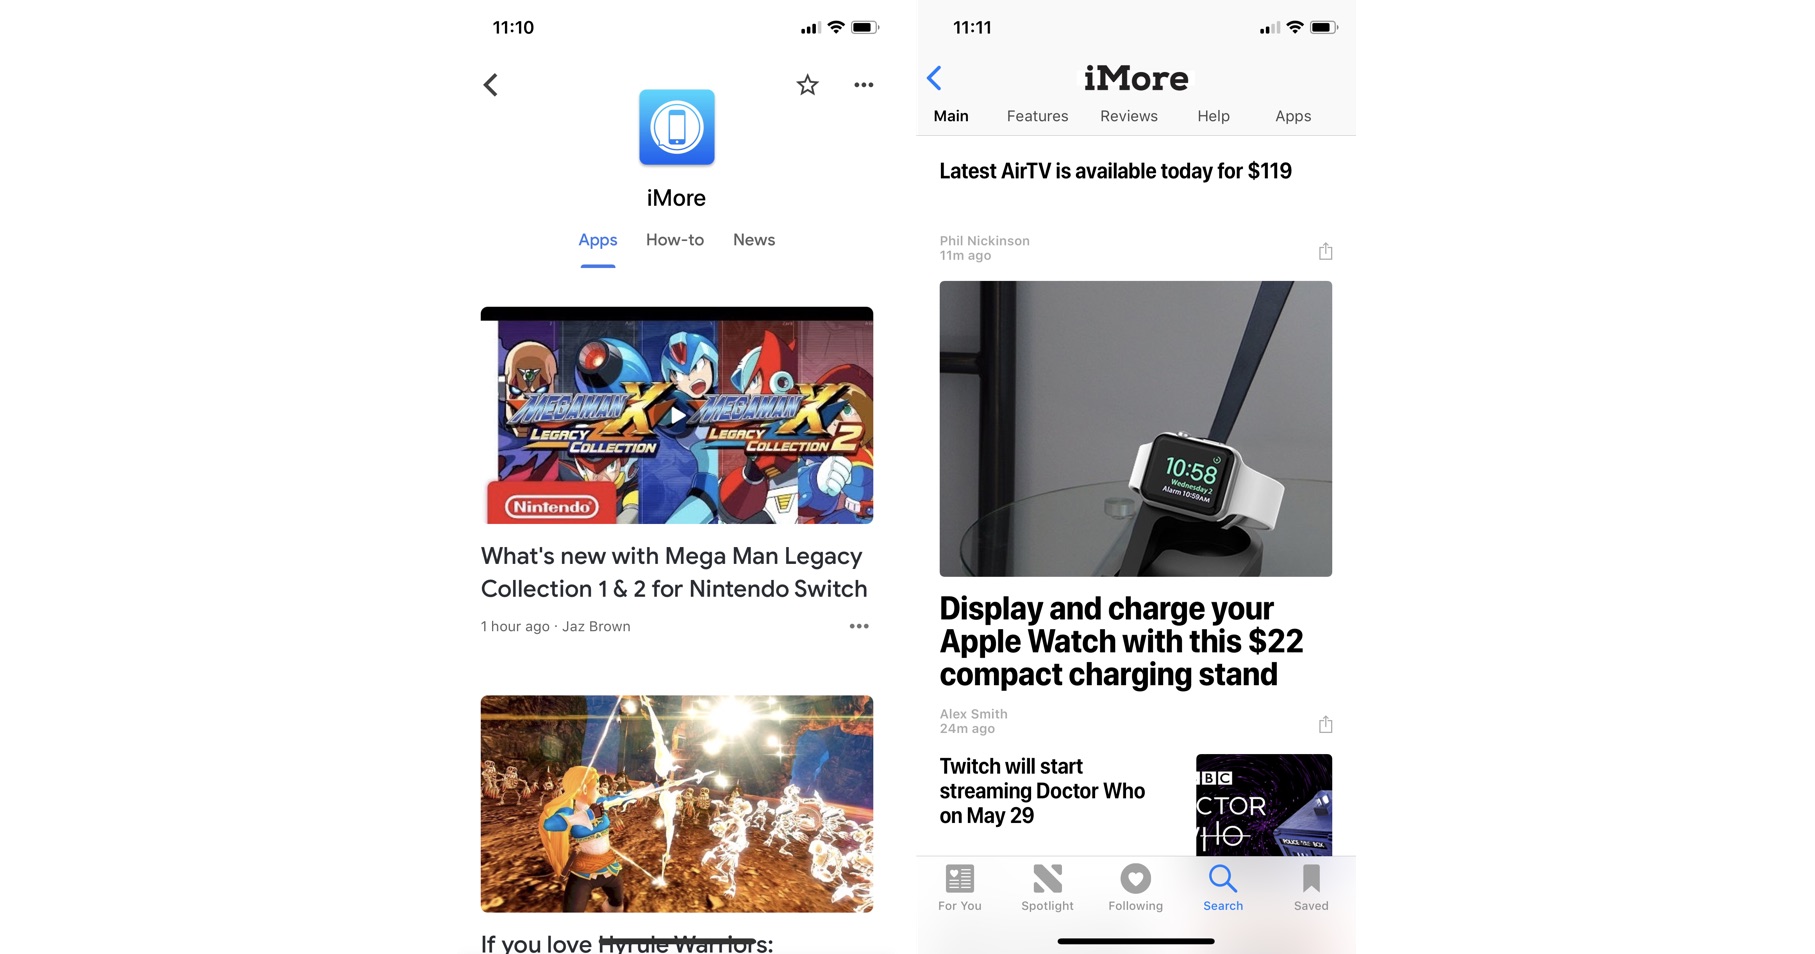 Organizations in Apple News and Google News